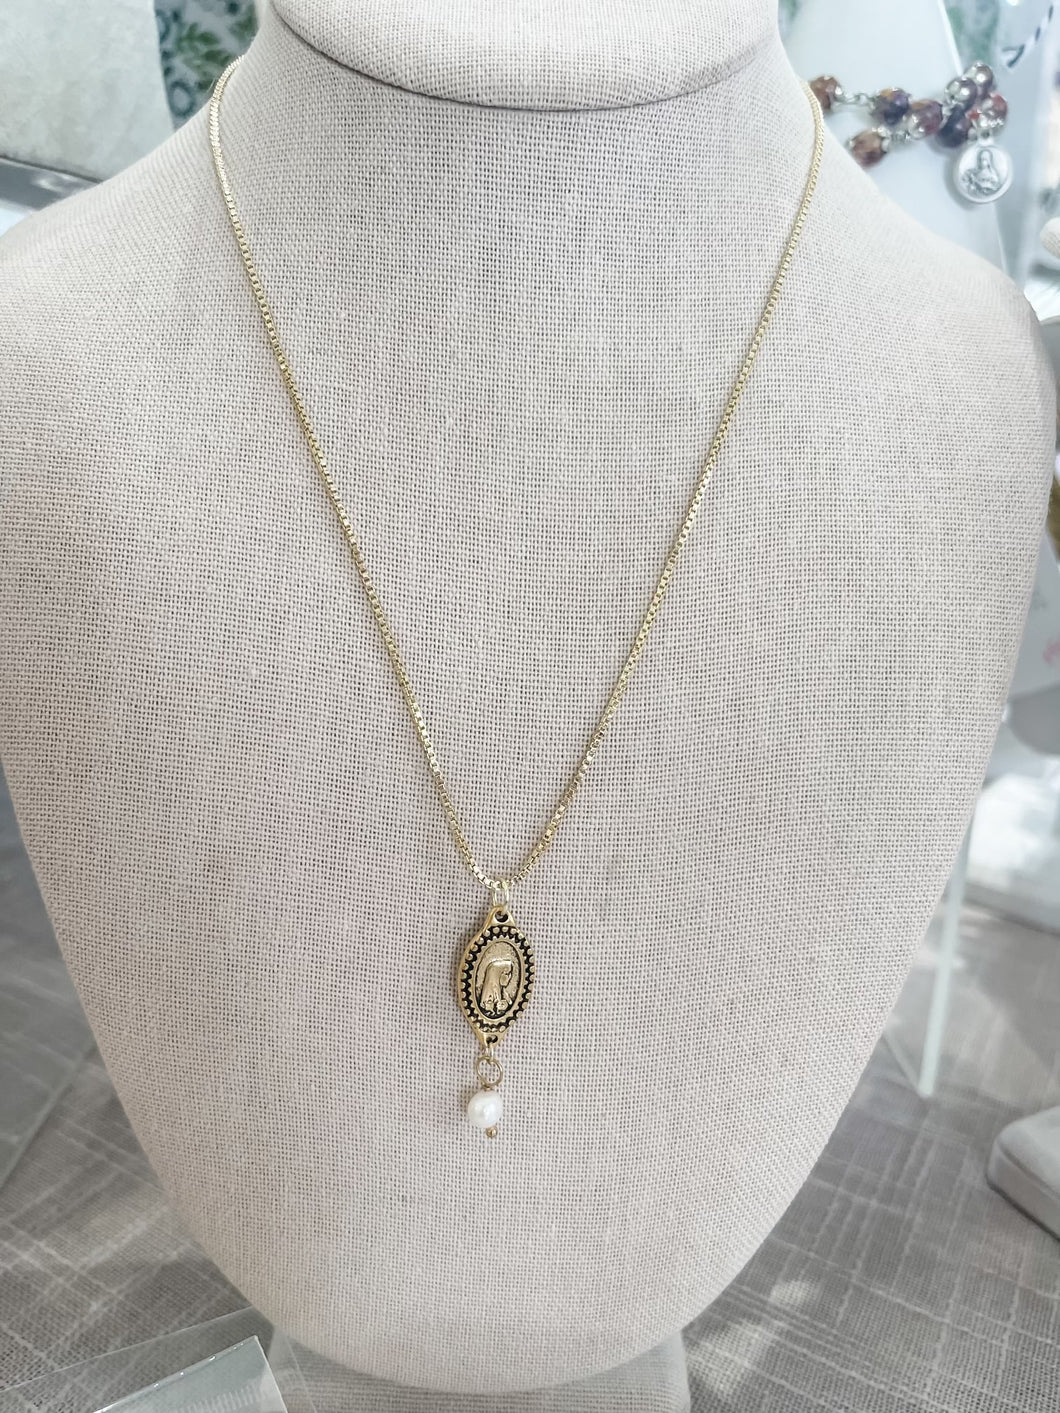 Gold Box Chain with Lourdes and Pearl necklace-The Gilded Mosquito by Lisa Leger